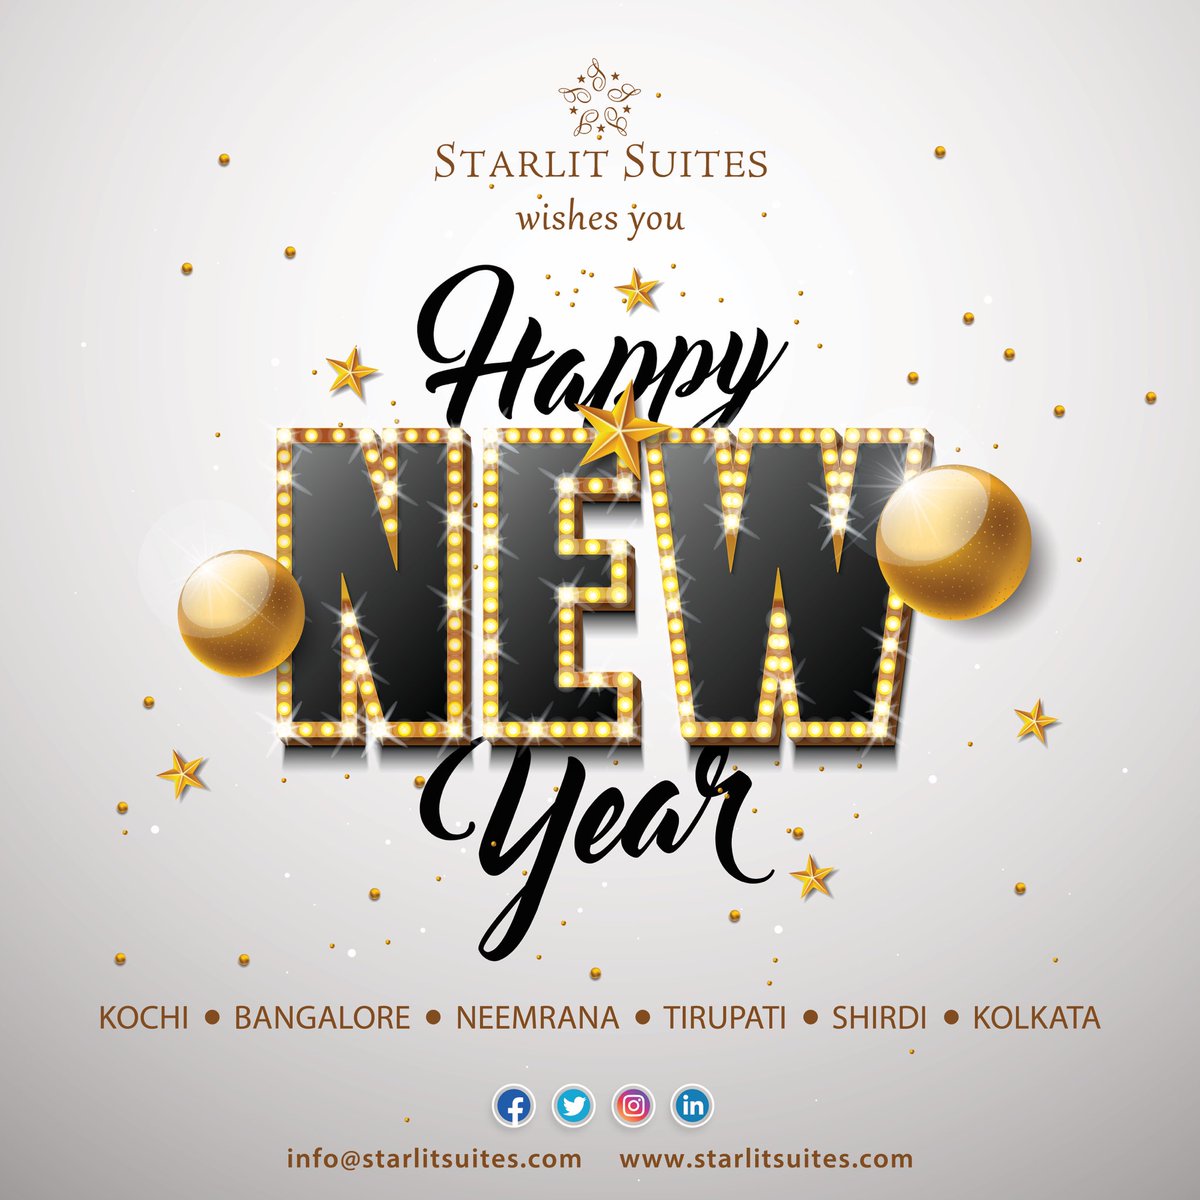 Wishing you a very #HappyNewYear from all of us at Starlit Suites! May the New Year bring you happiness, peace, and prosperity. Wishing you a joyous 2024! #starlitsuites #hospitality #specialevents #Bengaluru #kochi #Neemrana #tirupati #shirdi